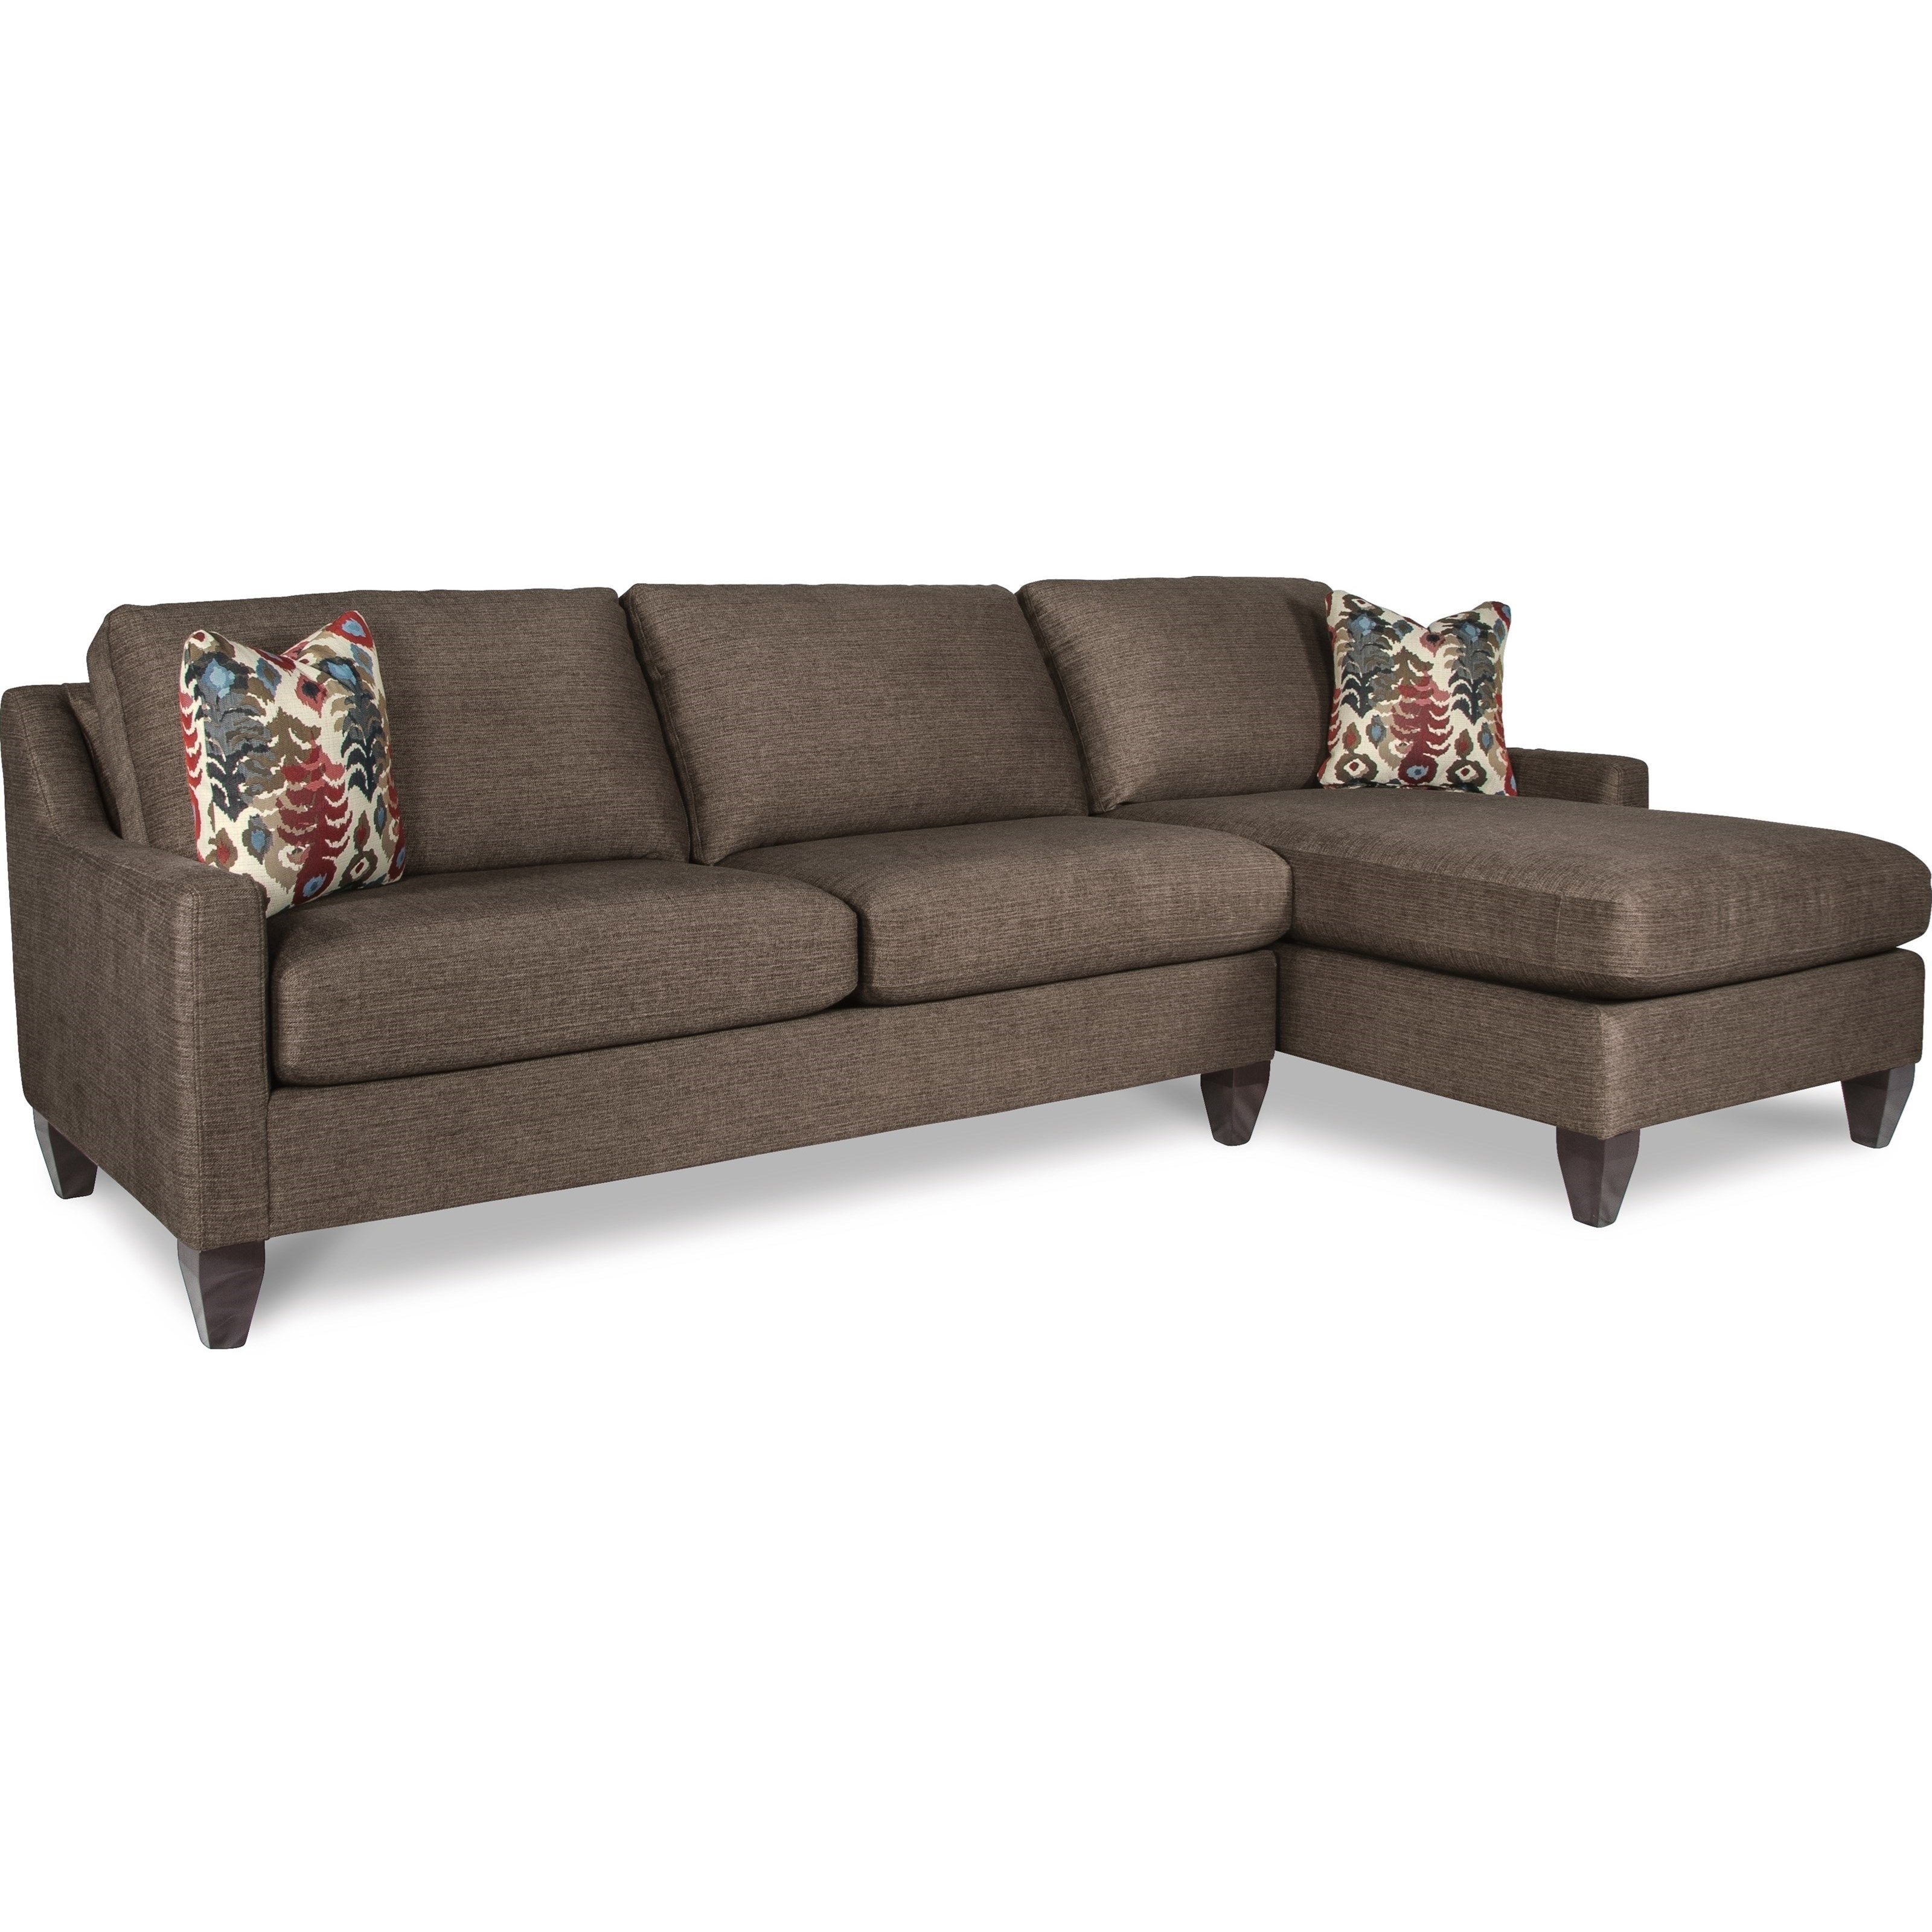 Raf Chaise Laf Sofa | Baci Living Room For Mcdade Graphite 2 Piece Sectionals With Laf Chaise (View 13 of 25)